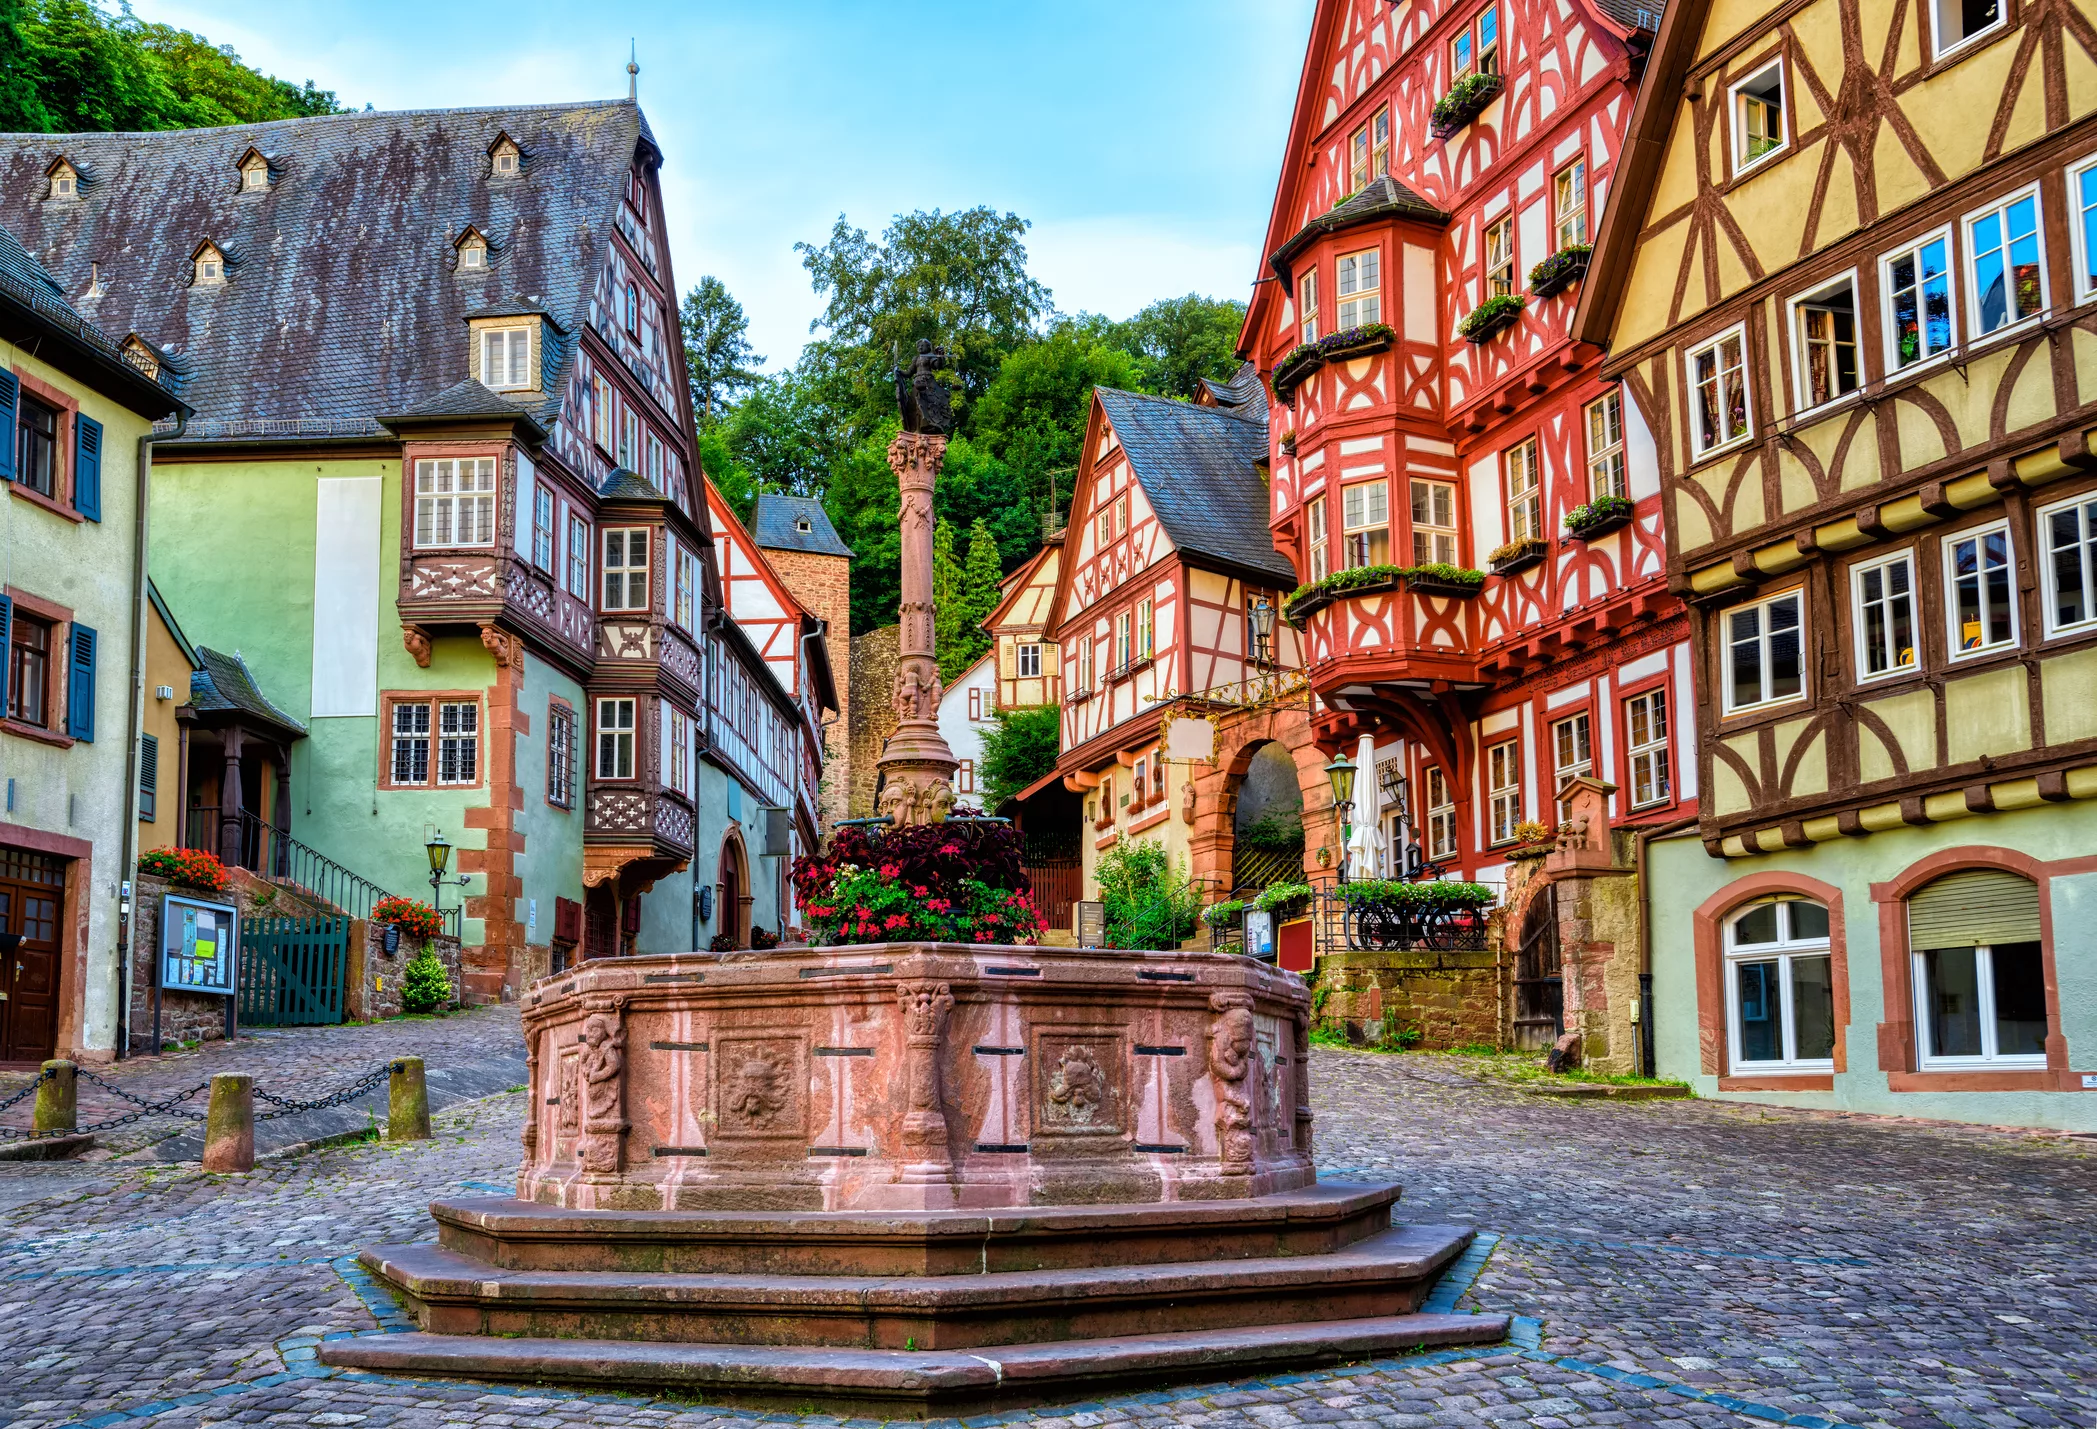 A colourful assormtnet of houses in the historical medieval Old Town in Bavaria, Germany.